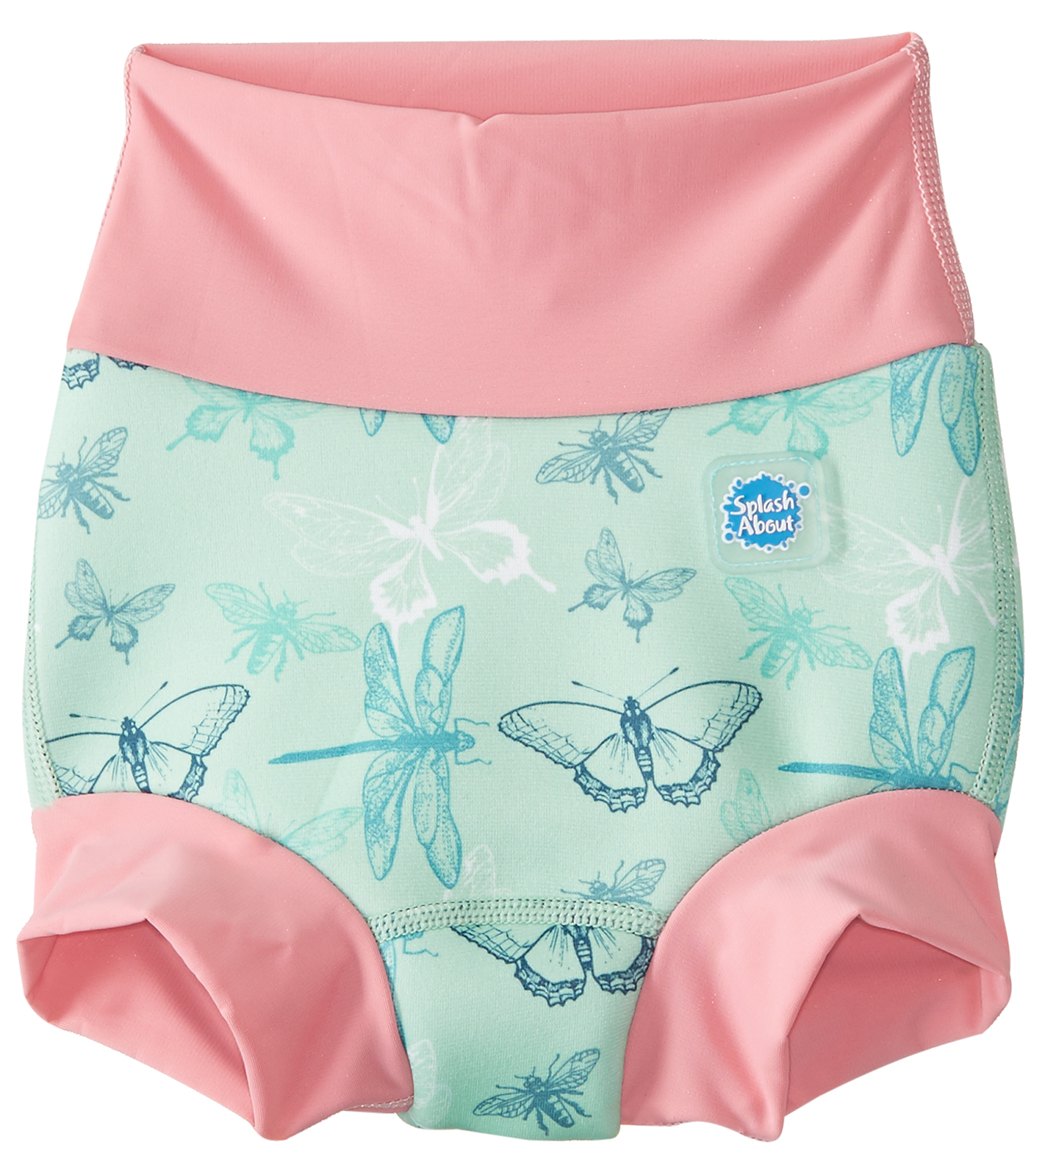 Splash About New Improved Happy Nappy Swim Diaper 3 Months-3T - Dragonfly Small 0-3 Months - Swimoutlet.com